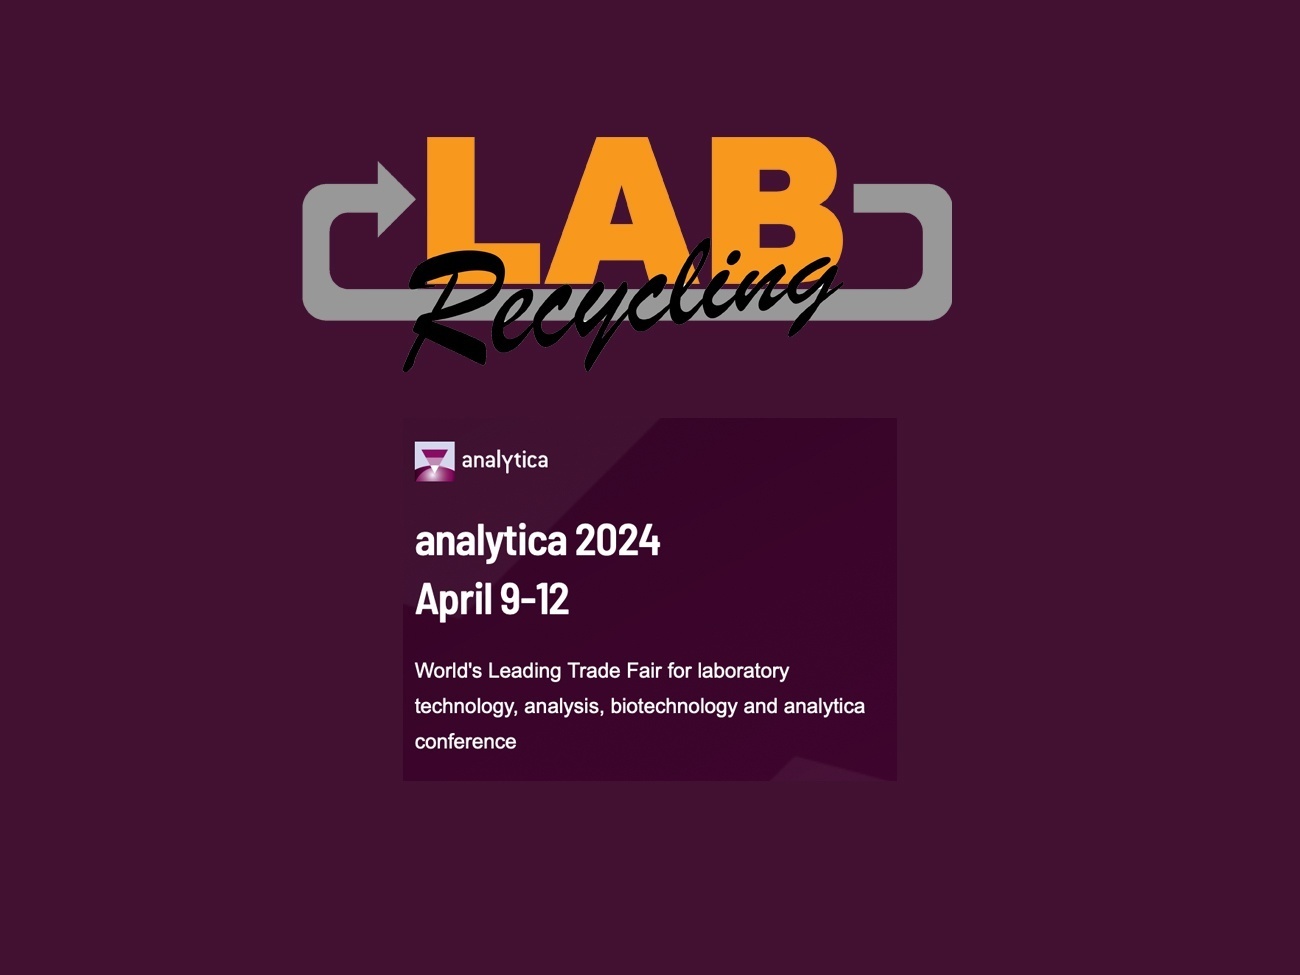 Labrecycling will be back at Analytica in Munich in 2024